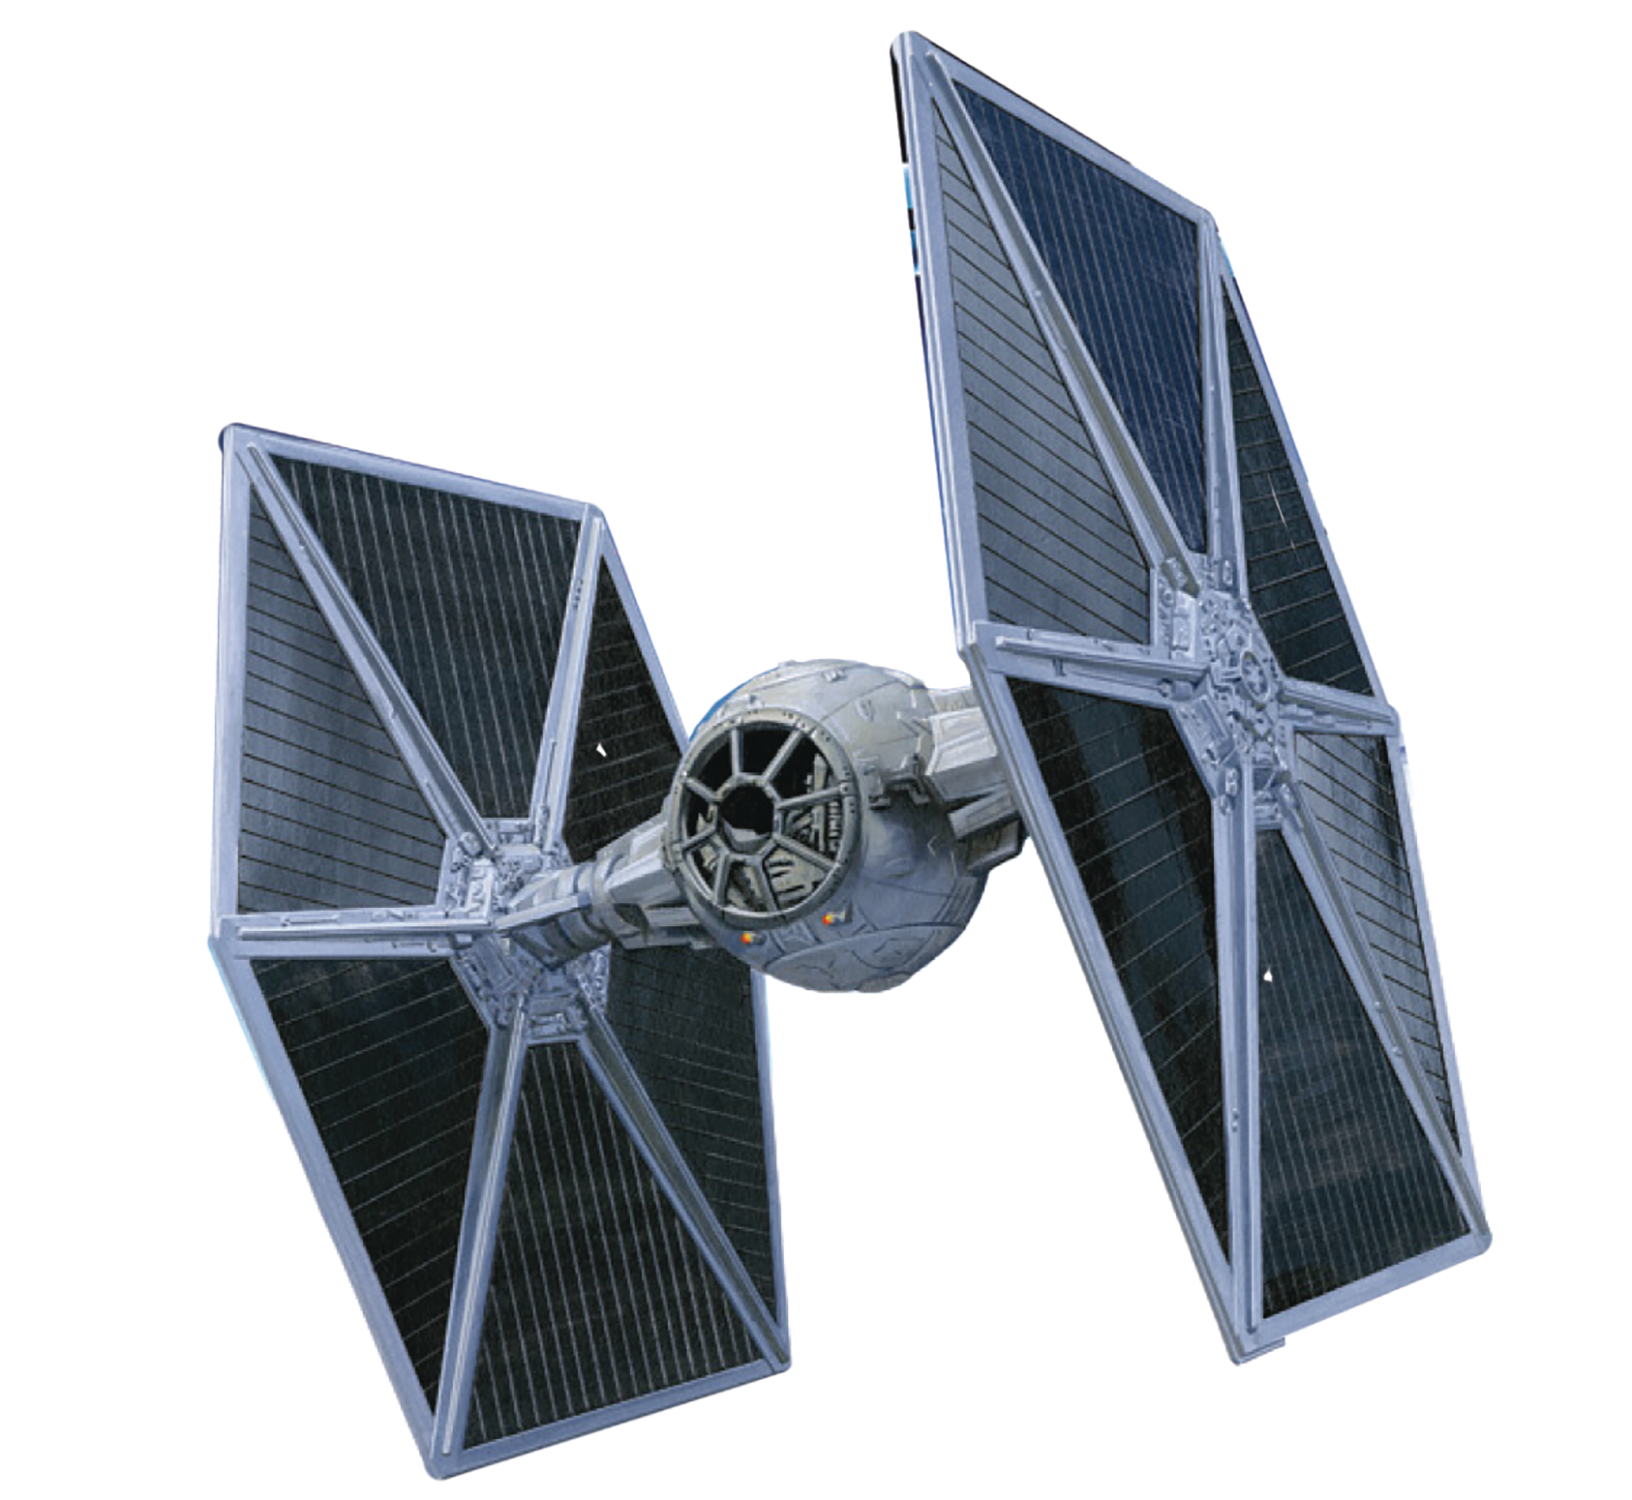 A New Hope Tie Fighter